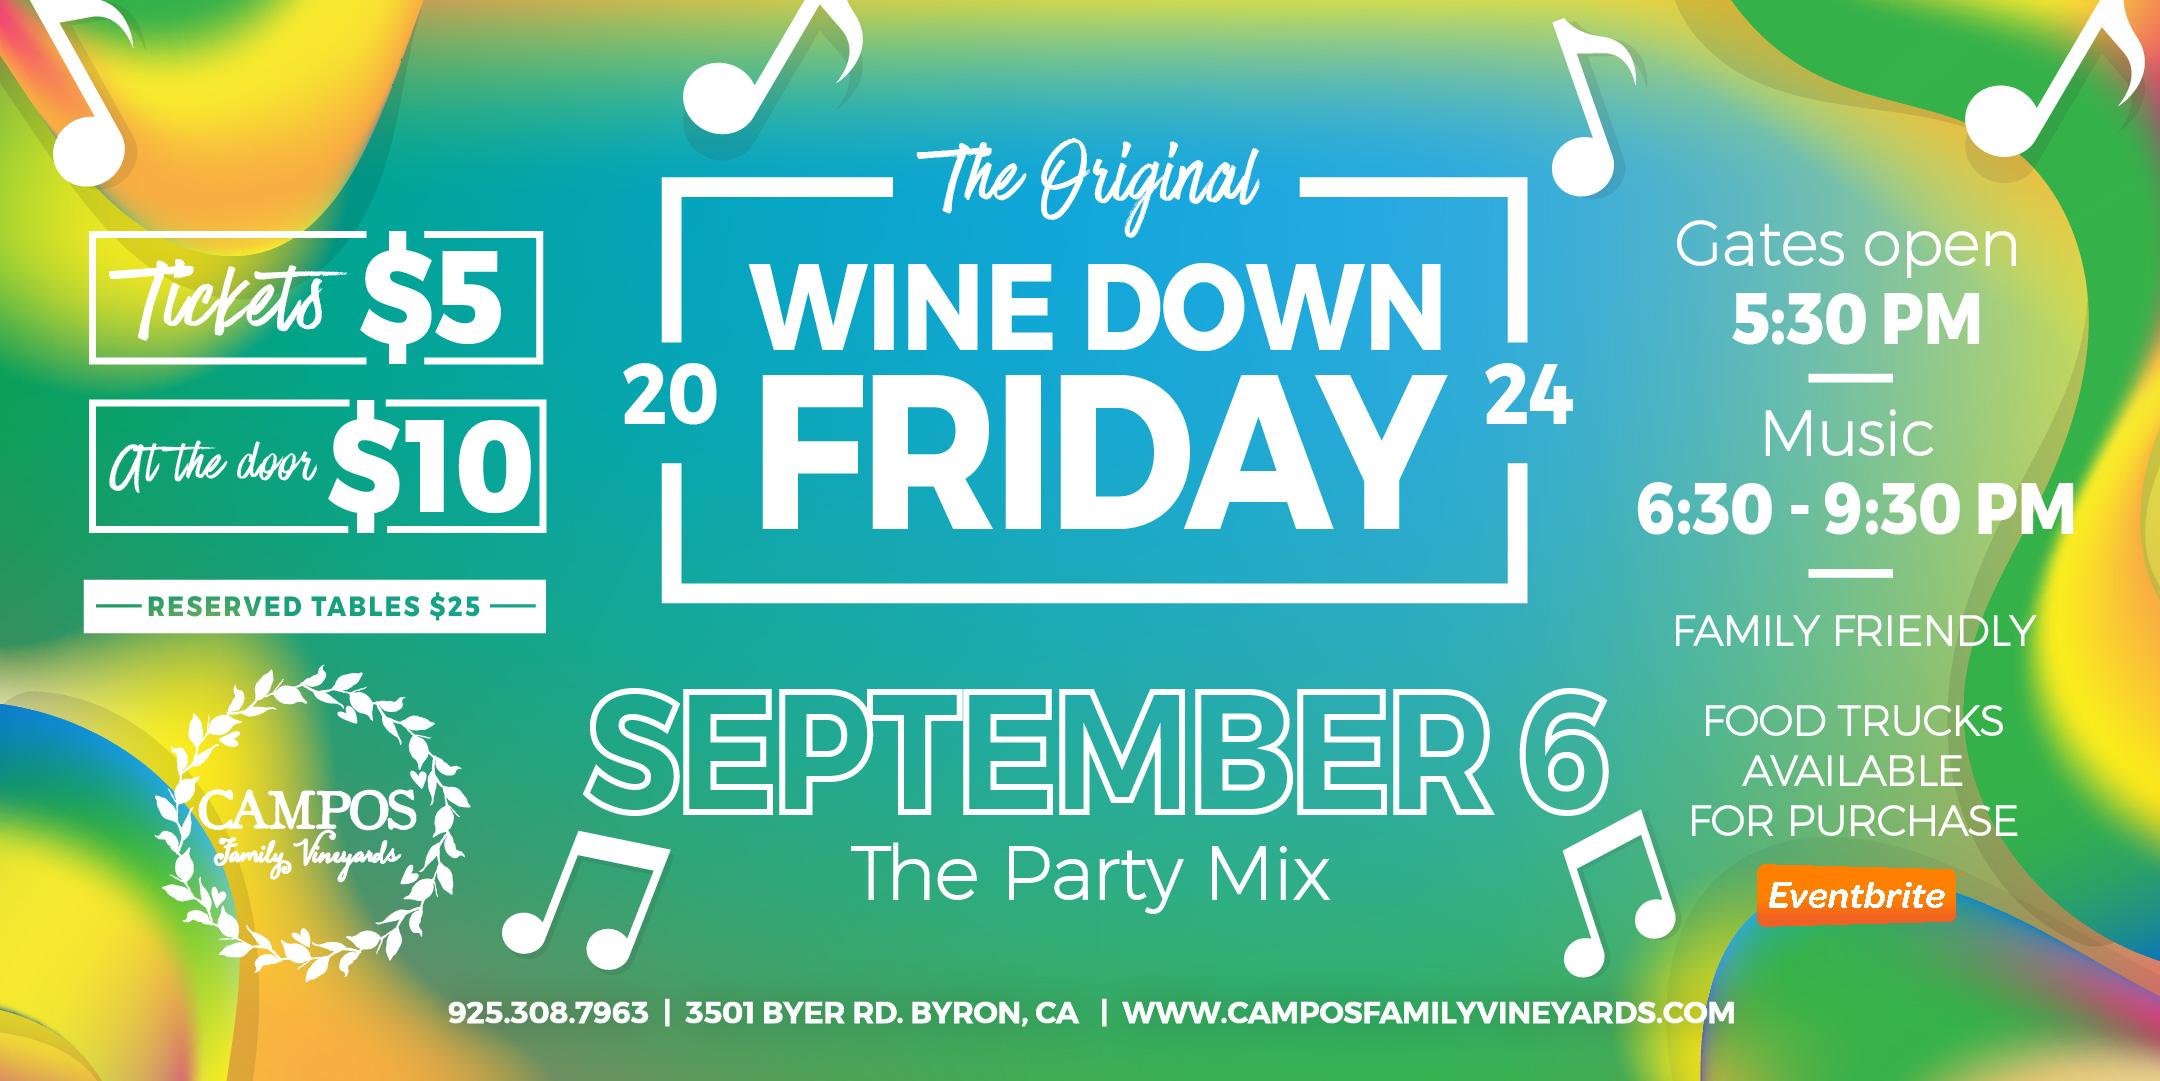 The Original Wine Down Friday - The Party Mix!